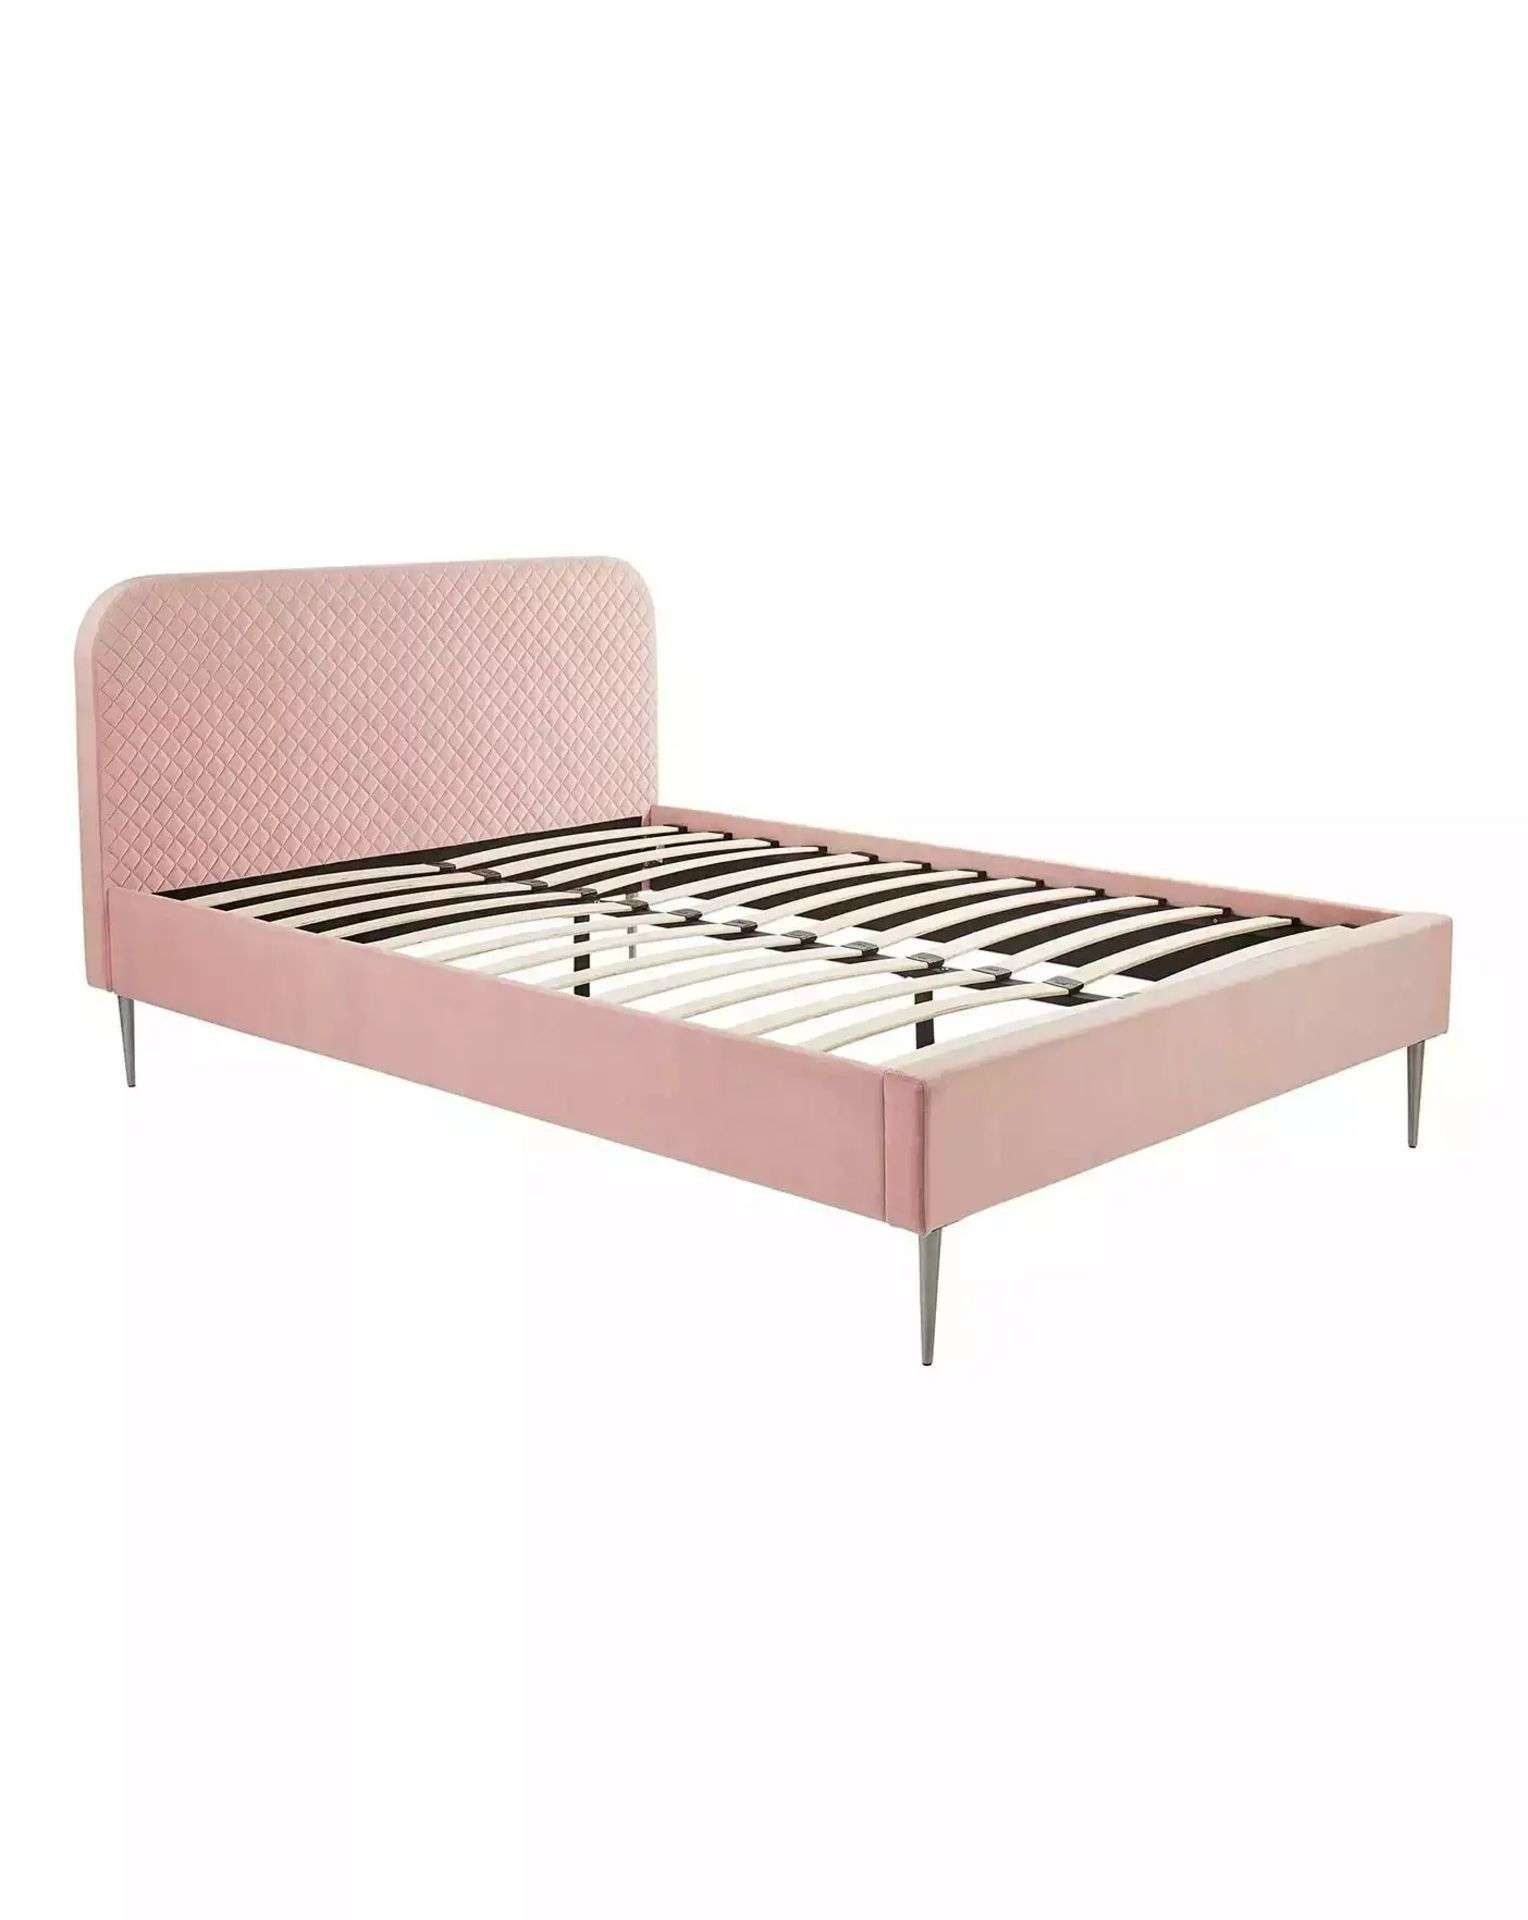 BRAND NEW ARDEN Quilted DOUBLE Bed Frame. BLUSH. RRP £339 EACH. The Arden Quilted Bed is the perfect - Image 2 of 2